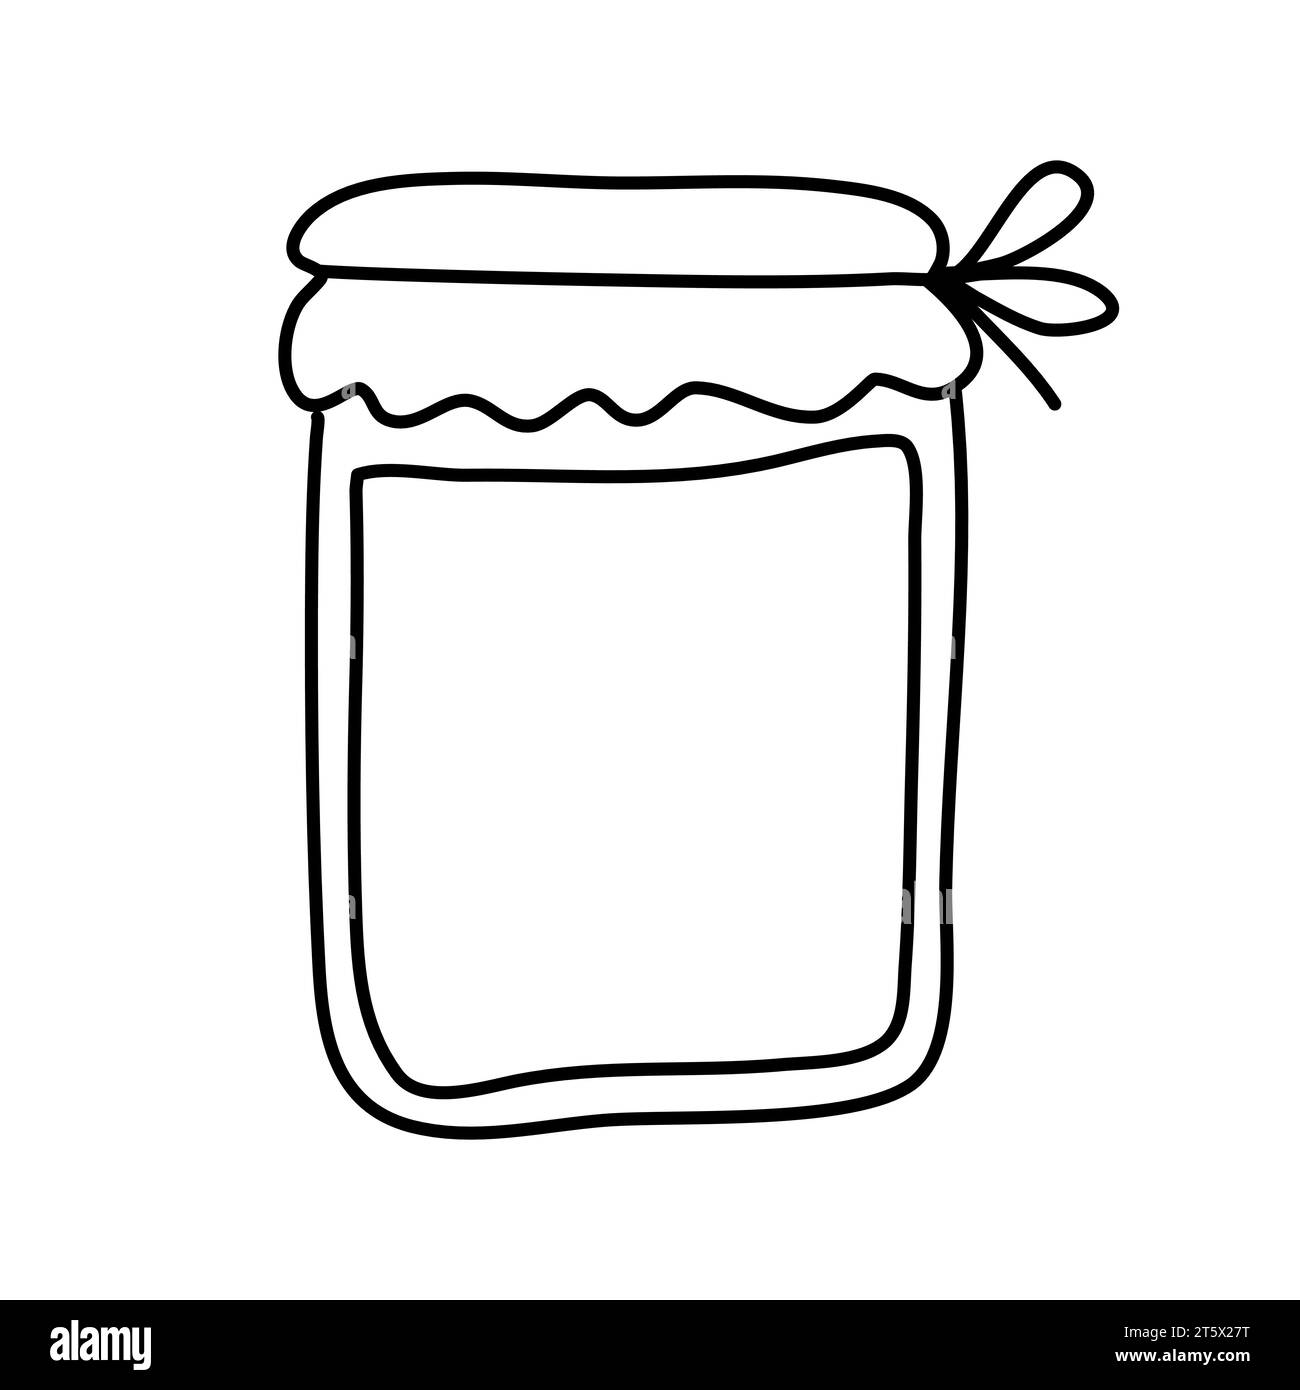 Doodle picture of a jar of jam, hand drawn vector illustration. Stock Vector